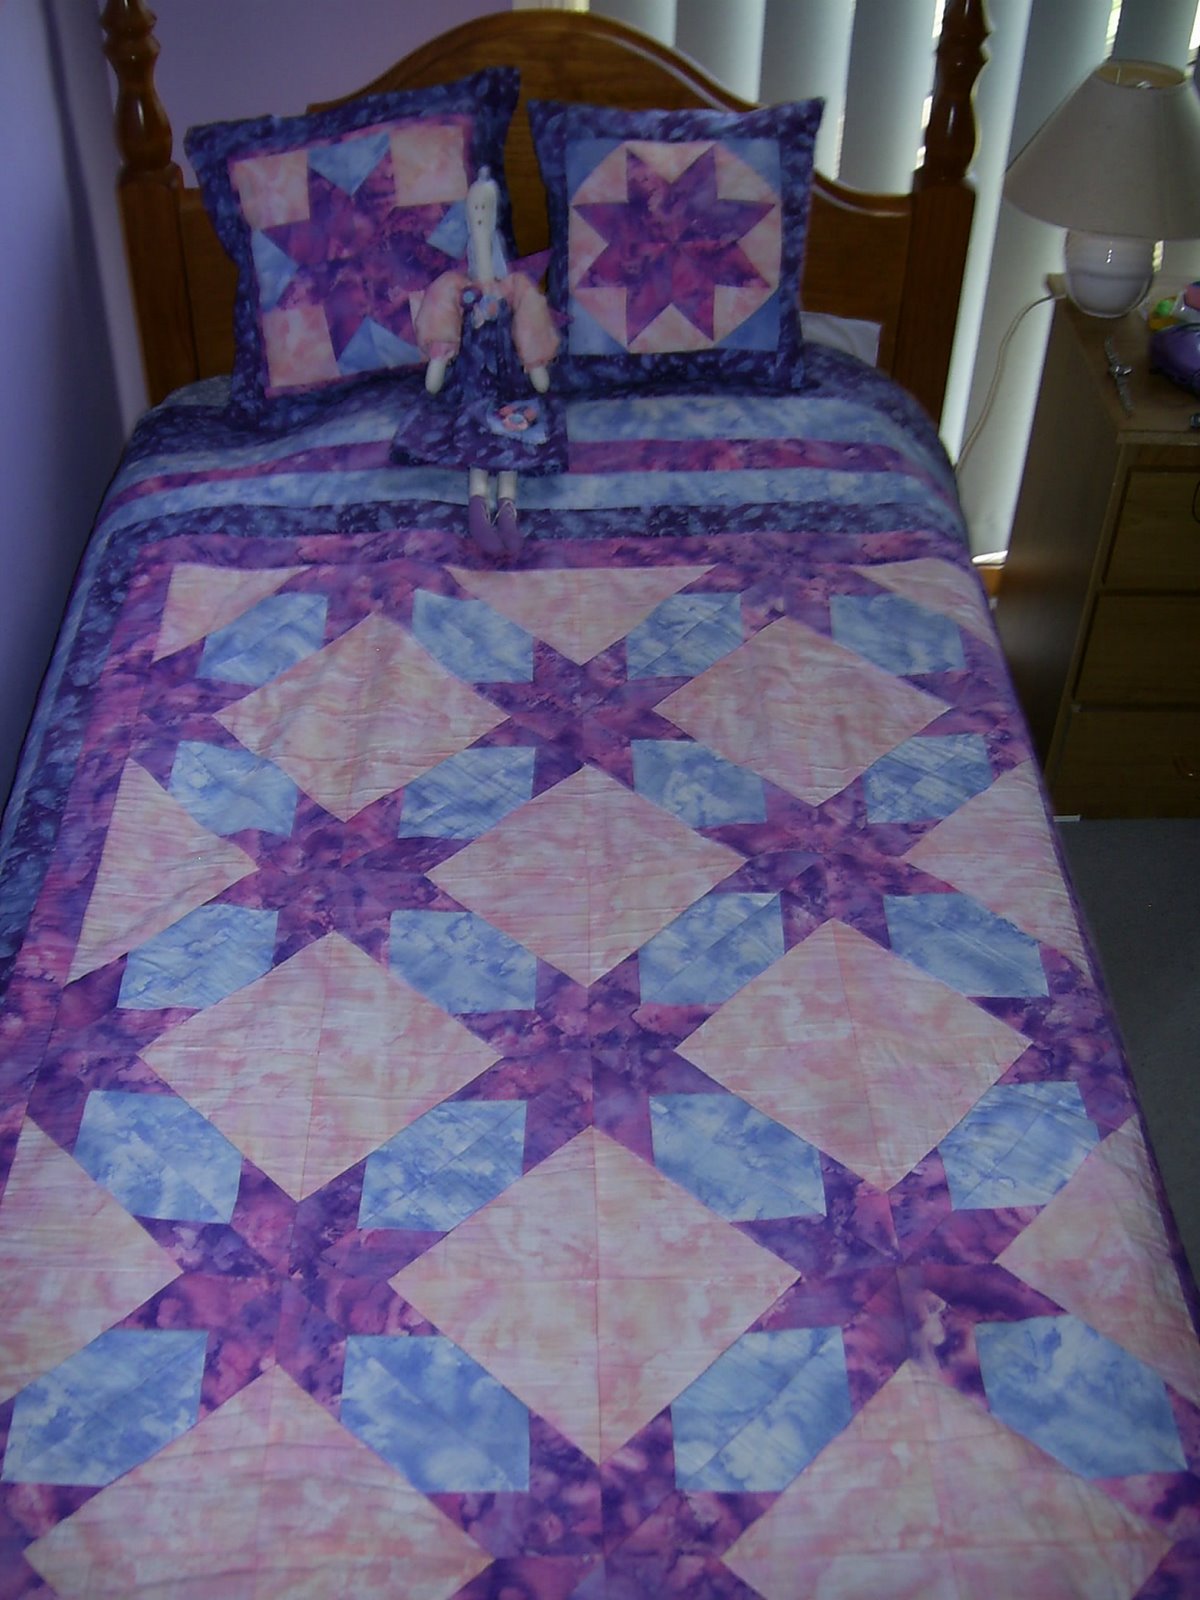 Sher's Quilt